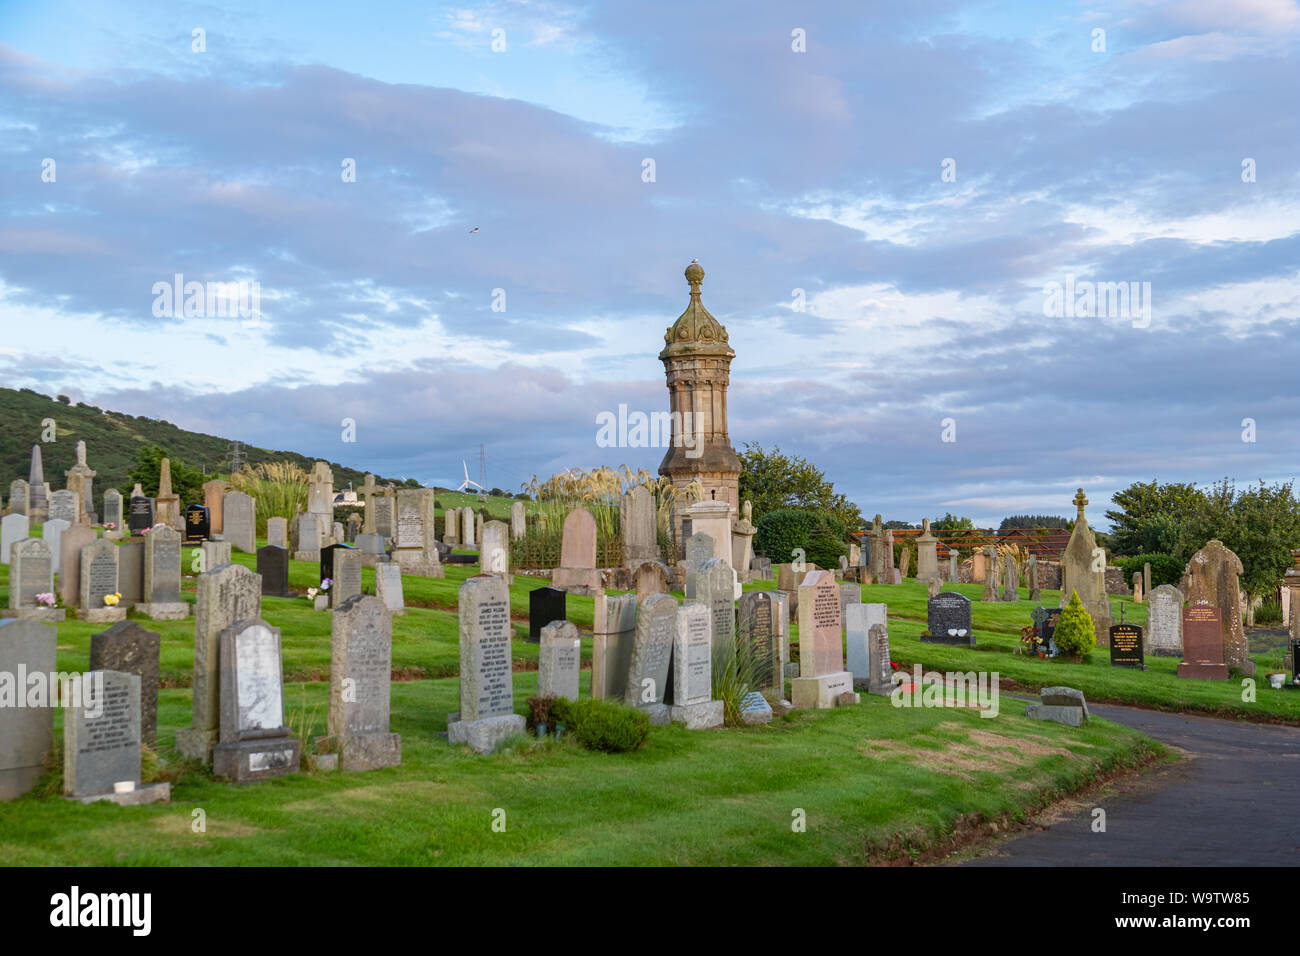 West Kilbride, Scotland, UK - August 10, 2019: Over looking the Gothic spier at West Kilbride cemetery on the west coast of Scotland. Stock Photo